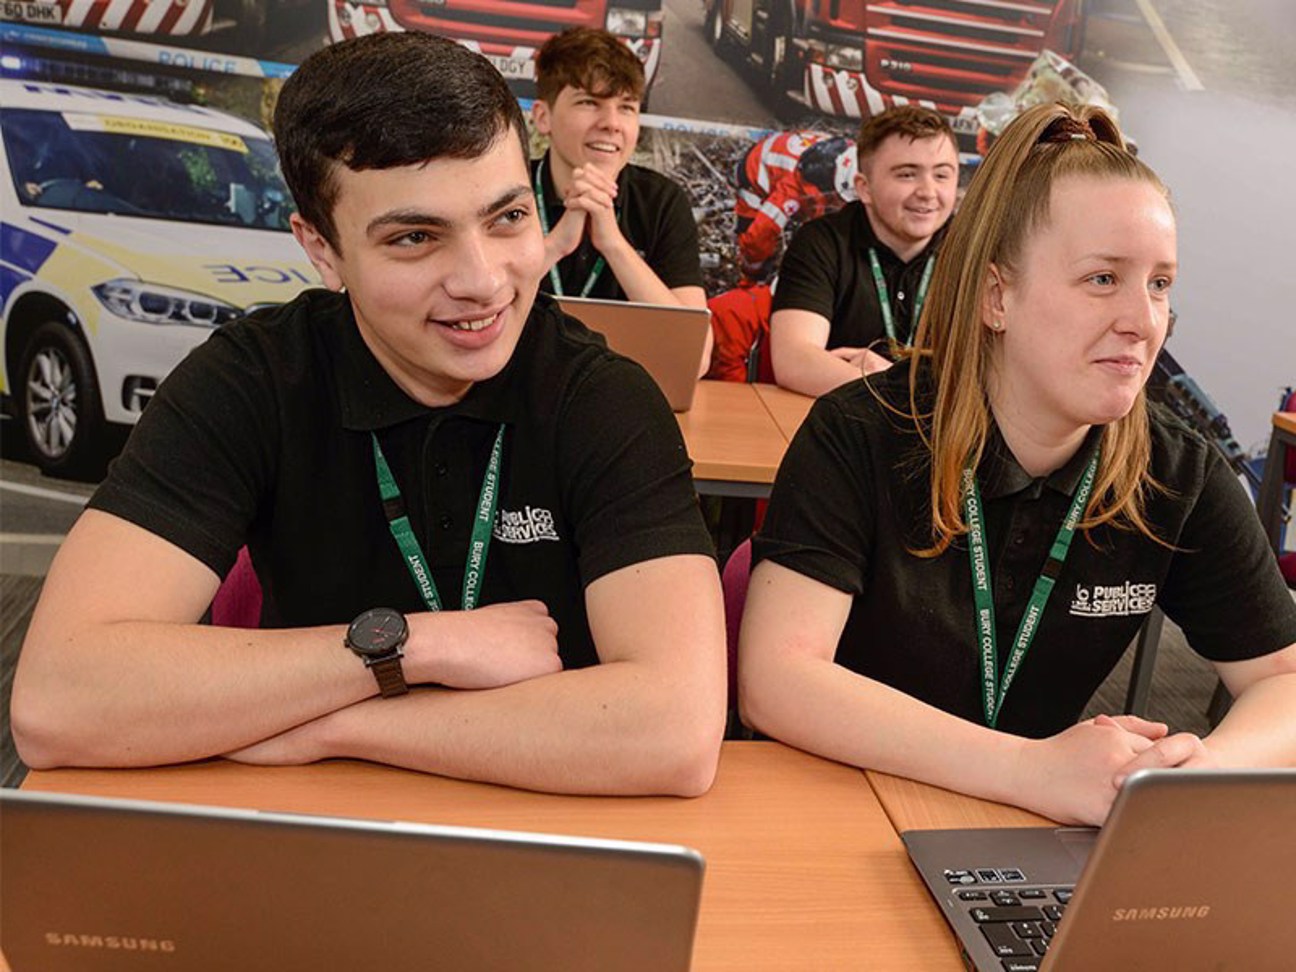 Public services students using a computer